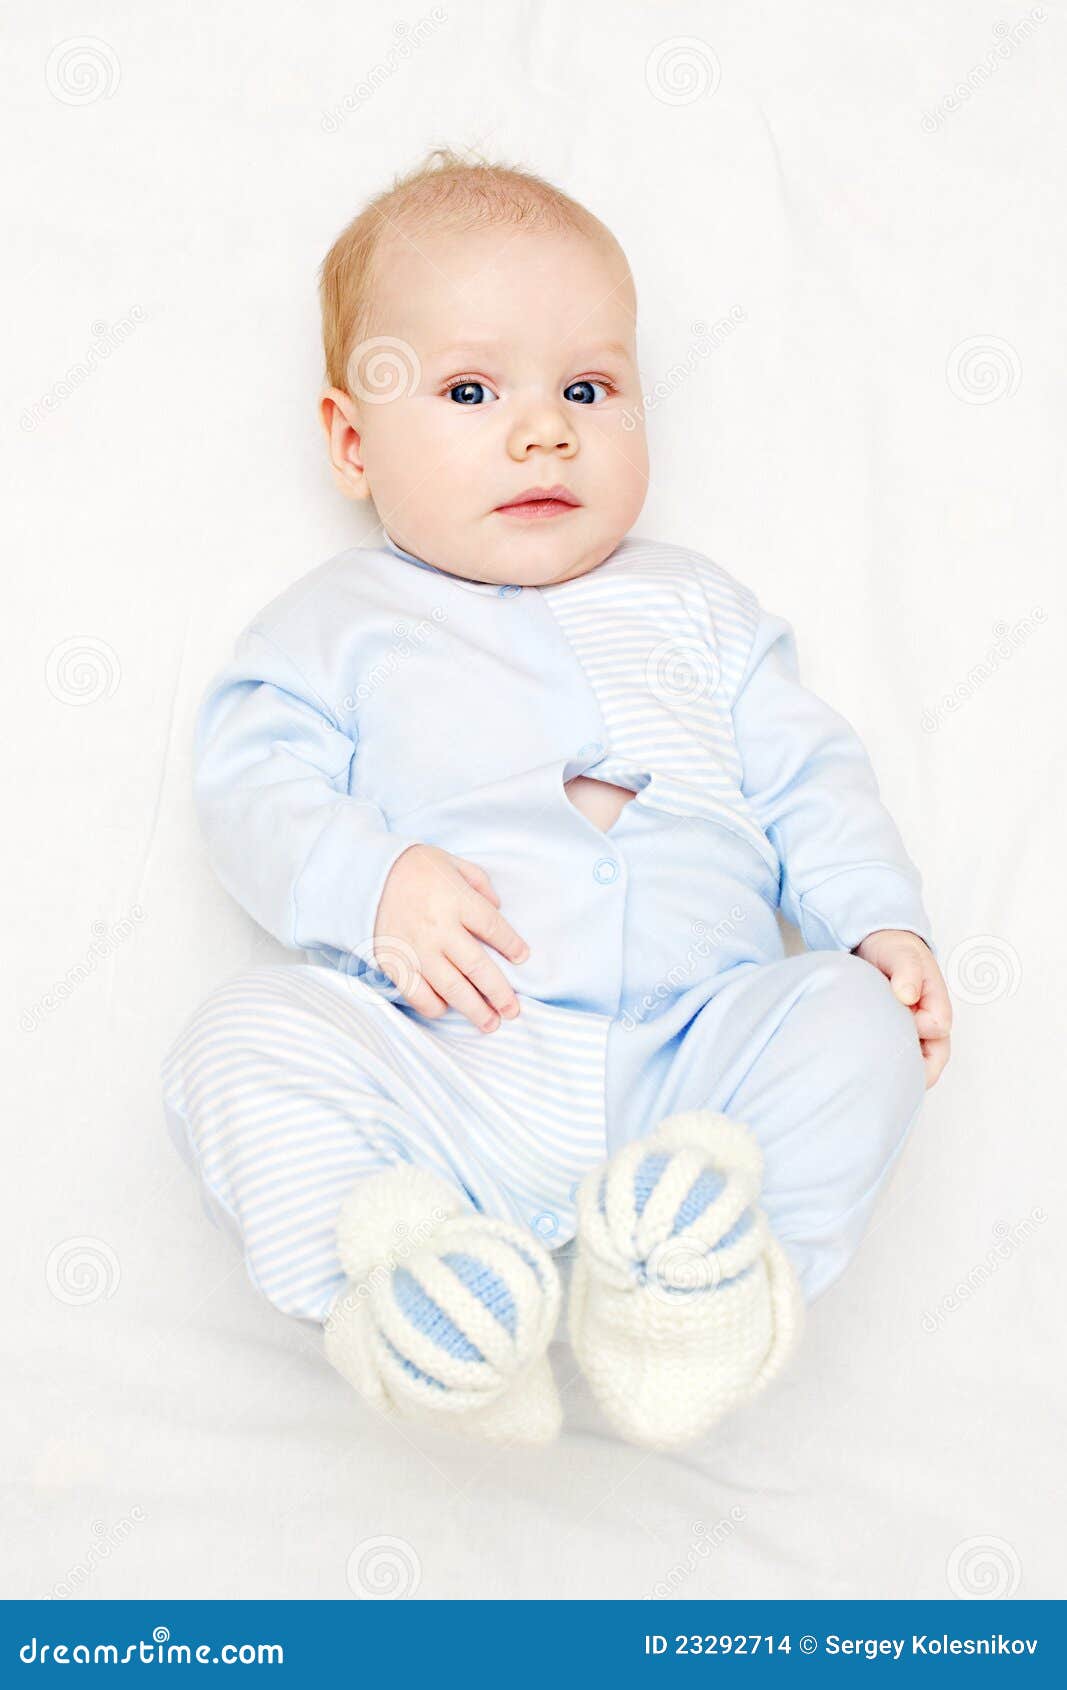 Cute baby boy stock photo. Image of looking, health, innocent - 23292714